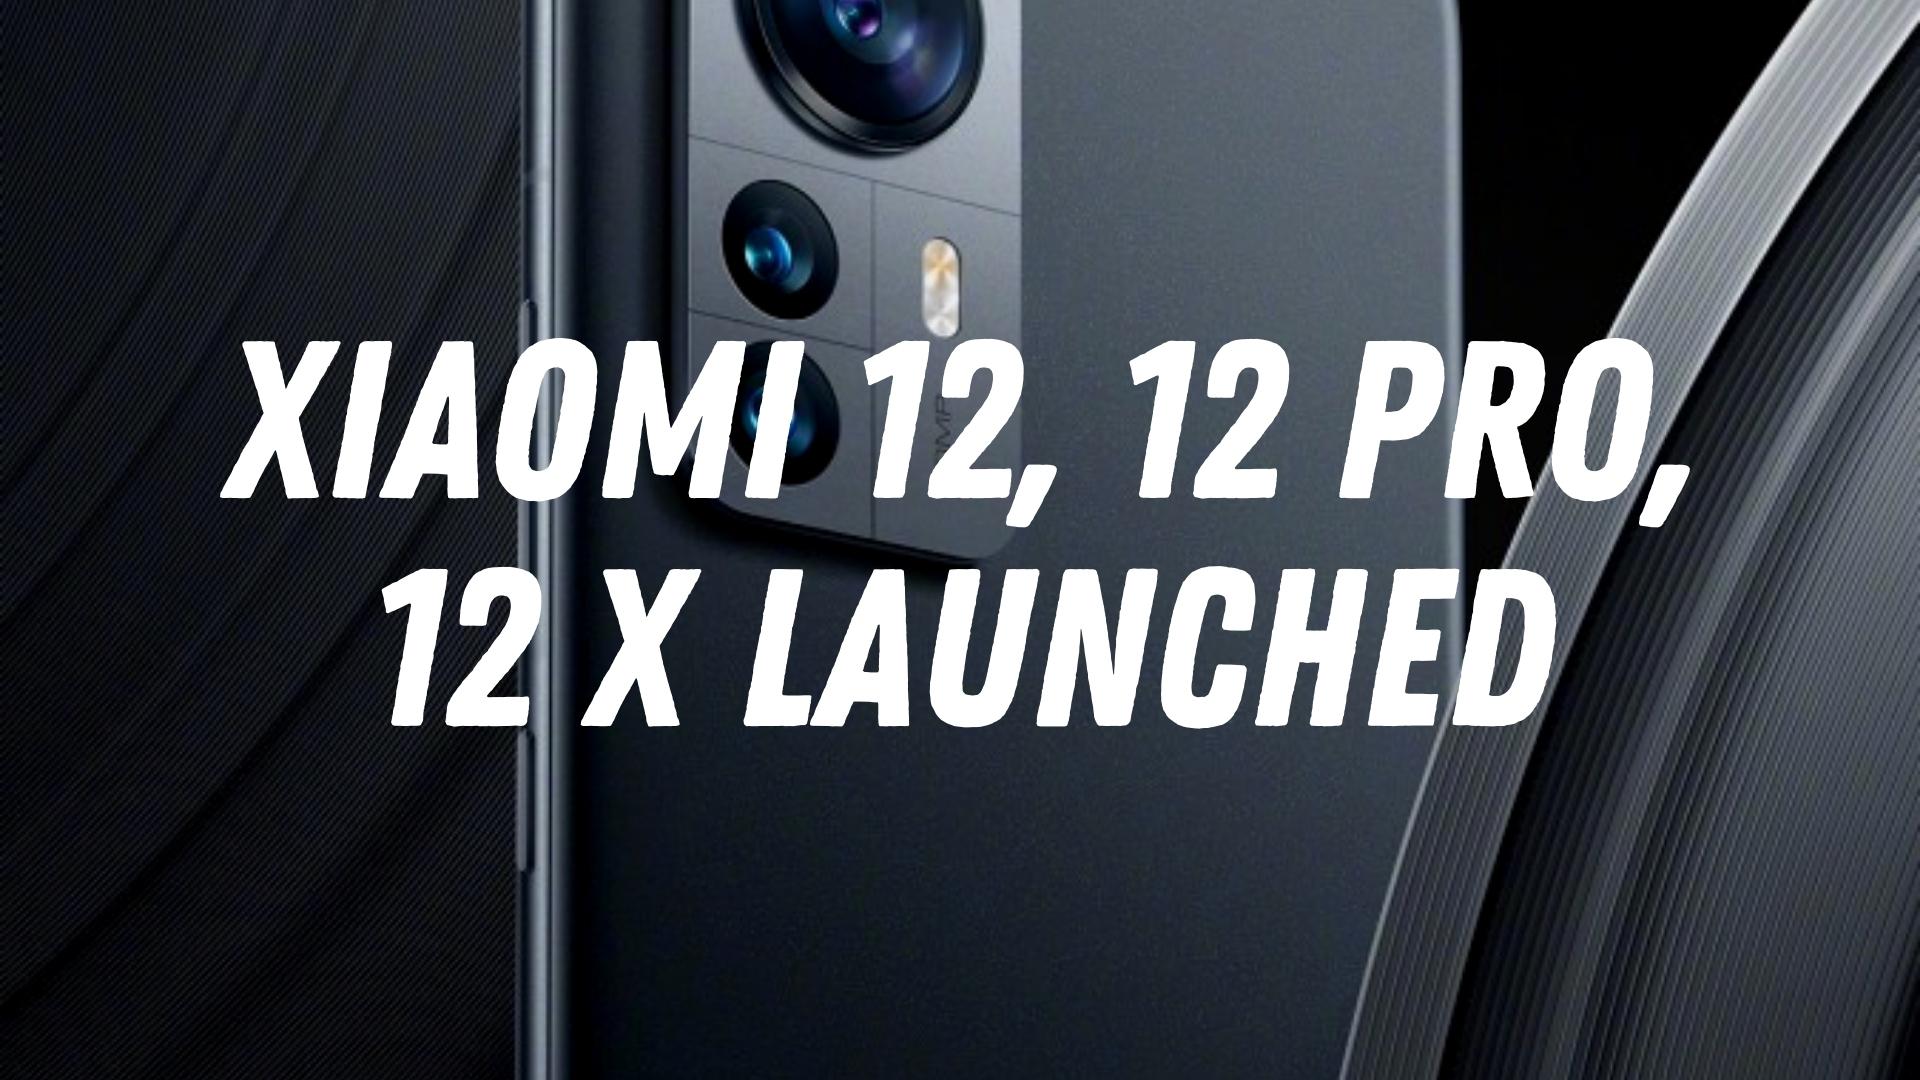 Xiaomi 12 12 Pro & 12X Launched in China with Snapdragon 8 Gen 1 All you need to know